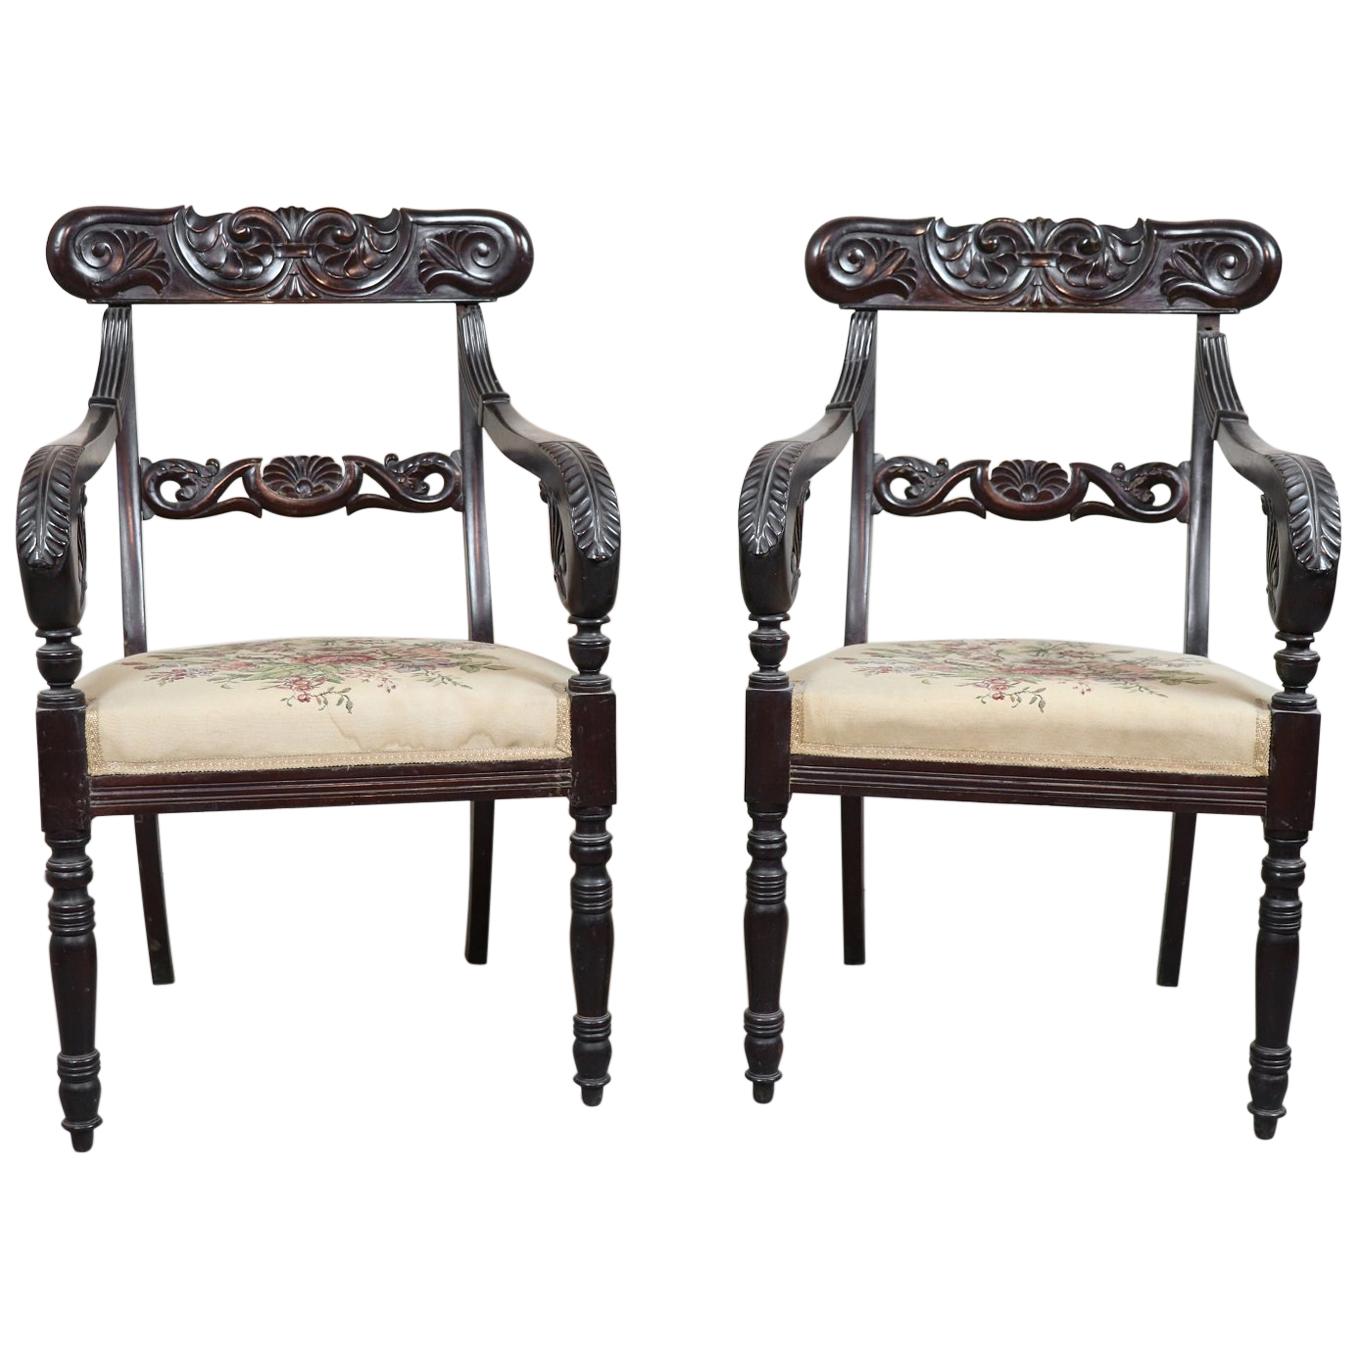 19th Century Italian Charles X Mahogany Carved Pair of Armchairs, Enrico Peter